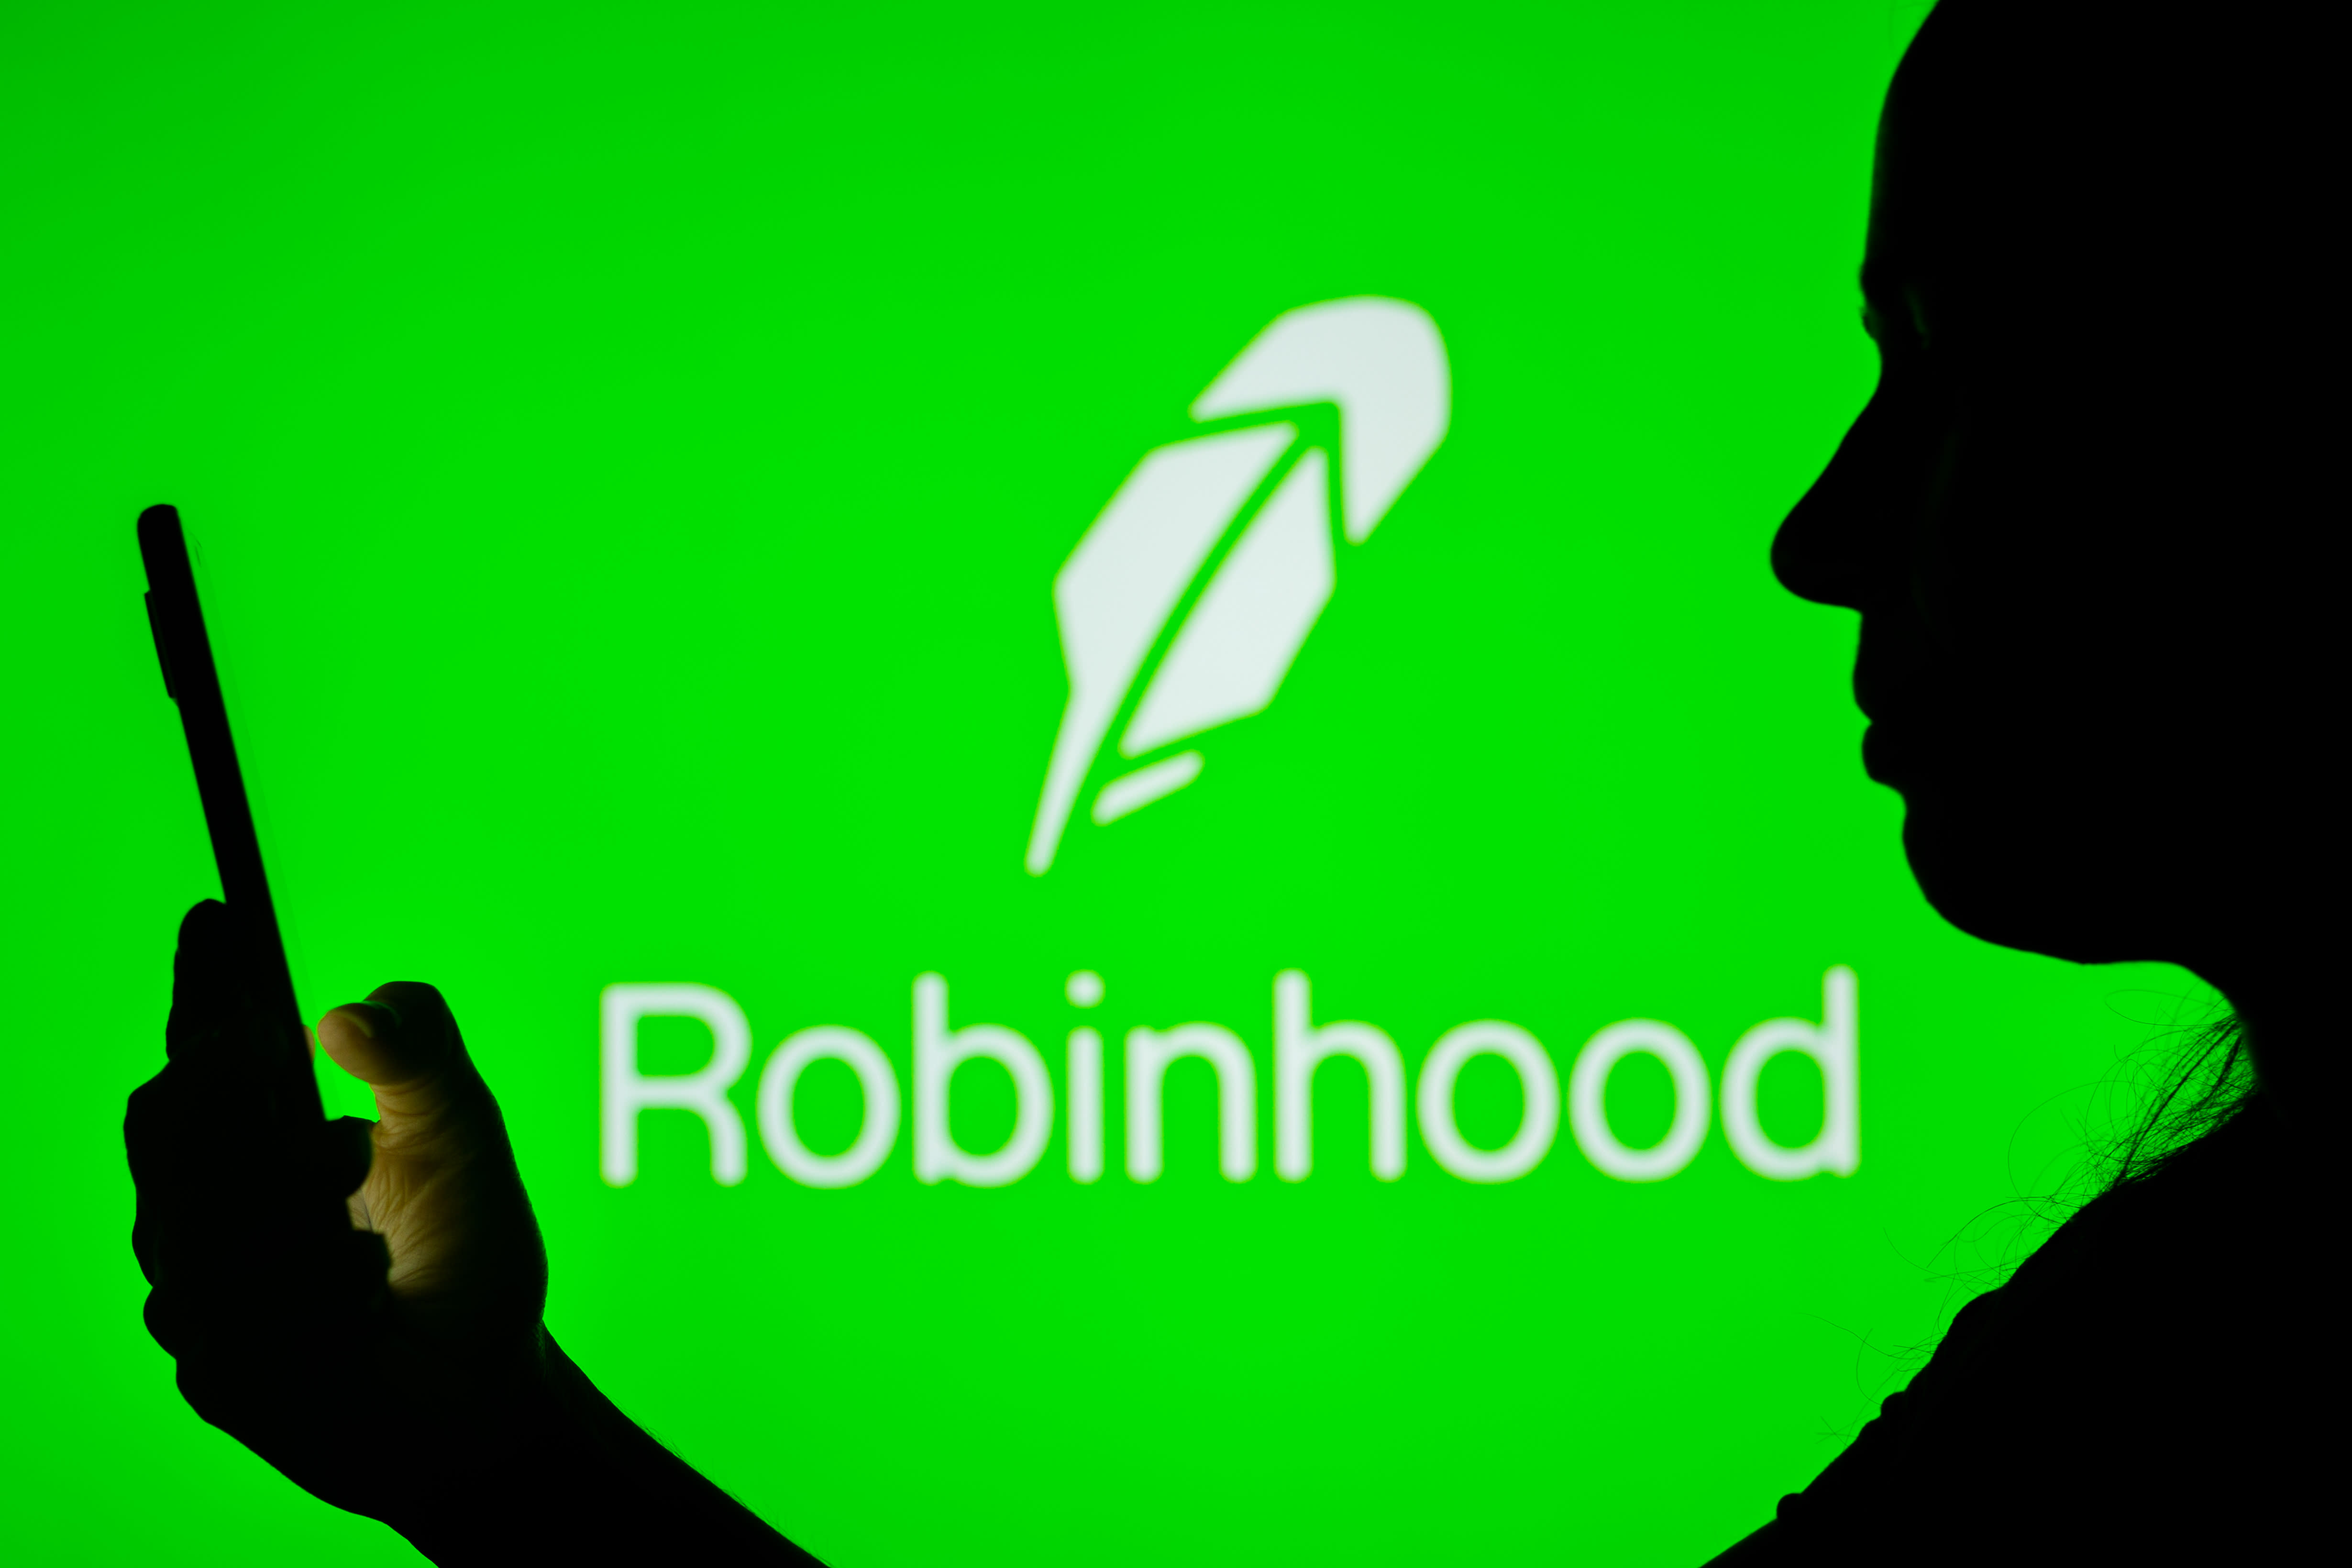 Robinhood will launch in the UK in its latest attempt at international expansion